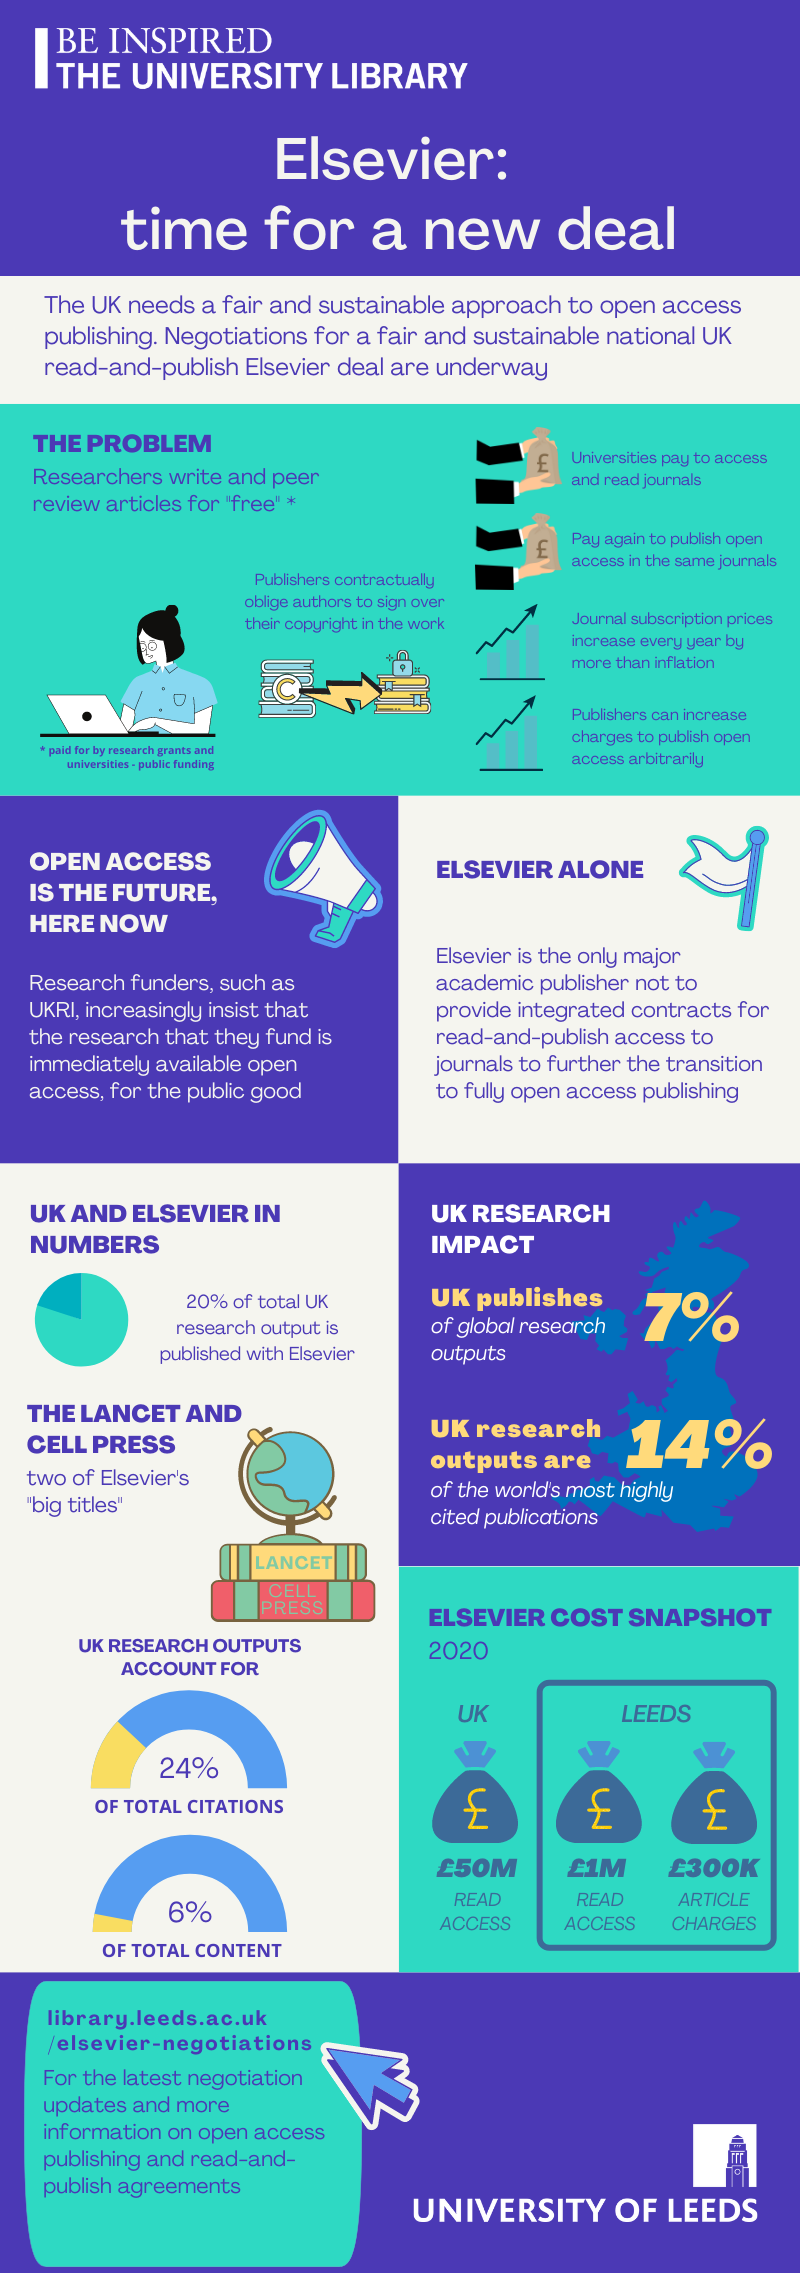 Elsevier time for a new deal infographic